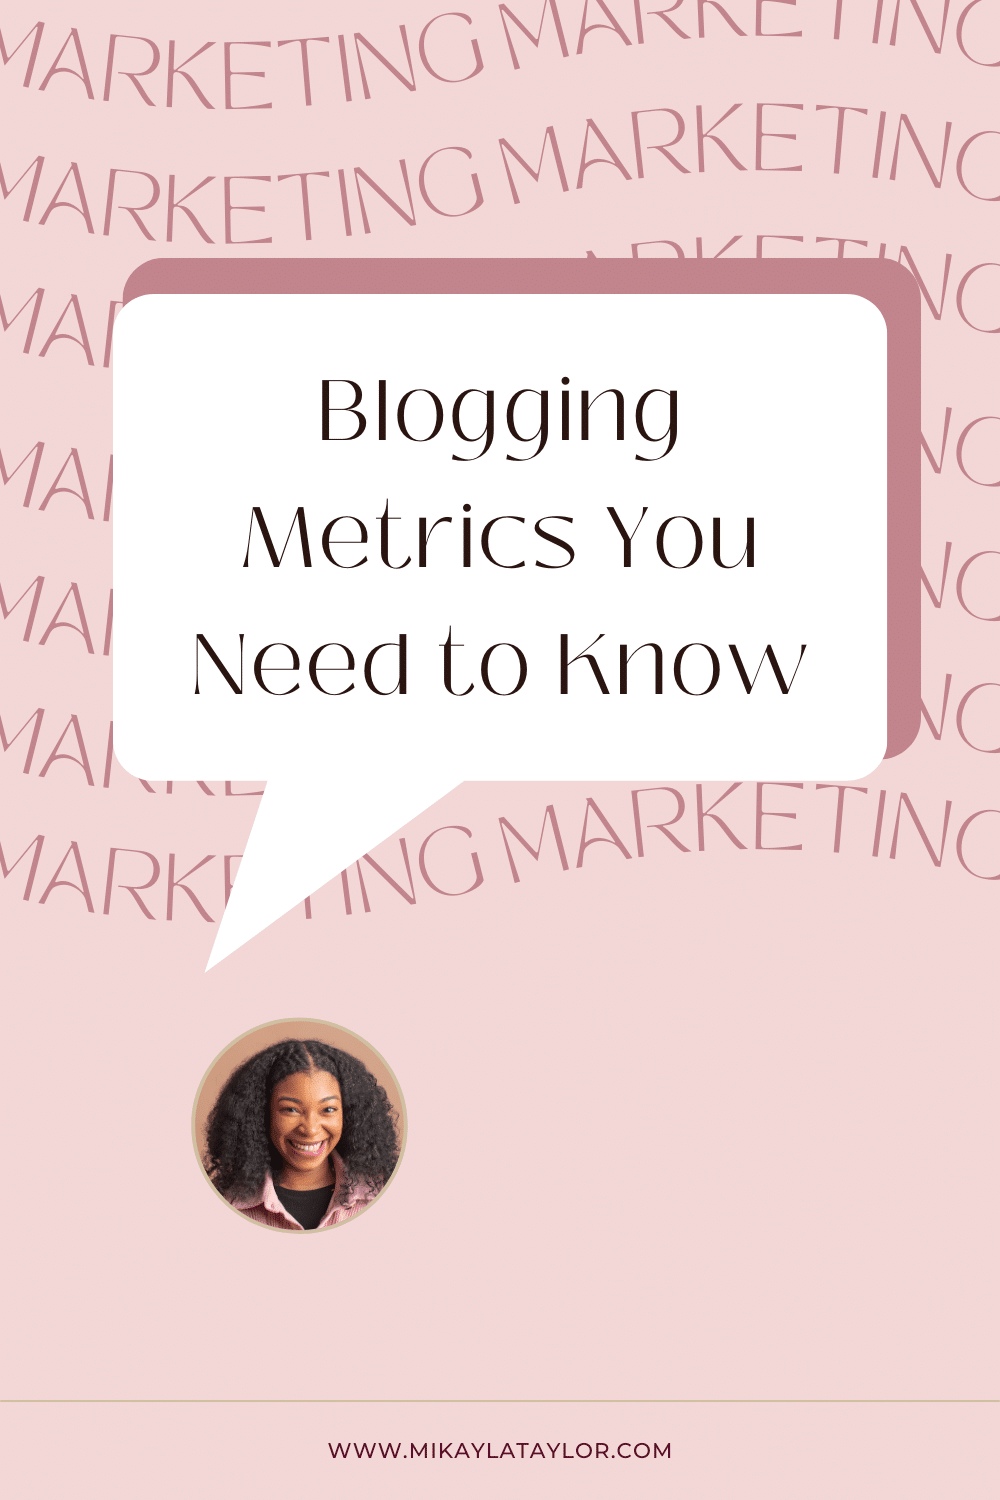 Blogging Metrics You Need to Know - Mikayla Taylor Pinterest